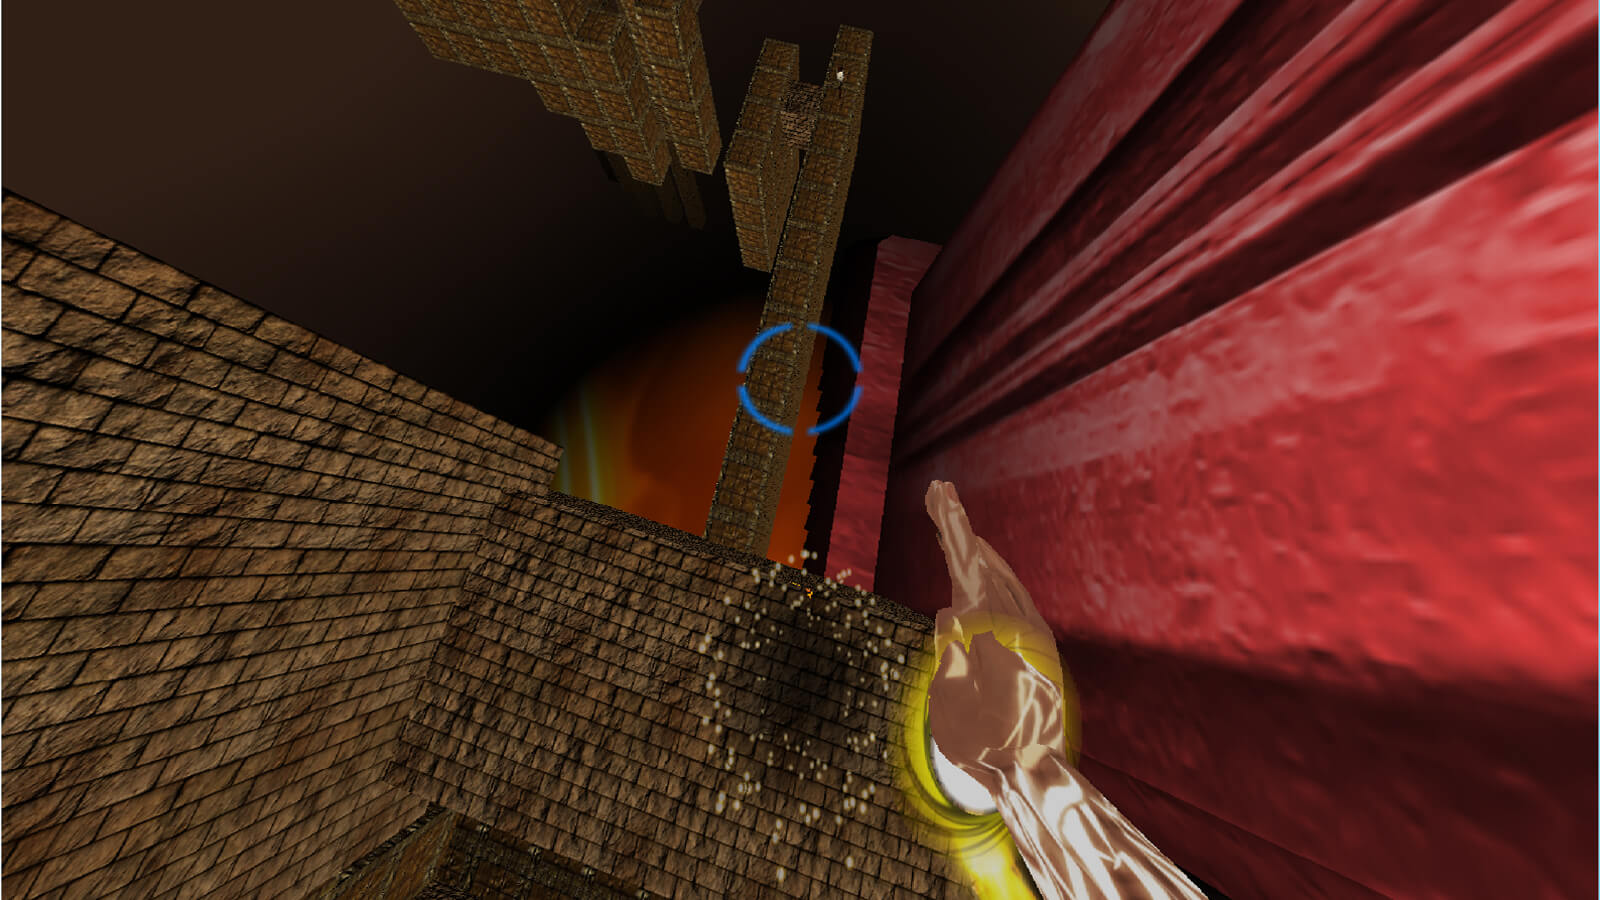 The player leaps high above a stone platform while their hand is held out below